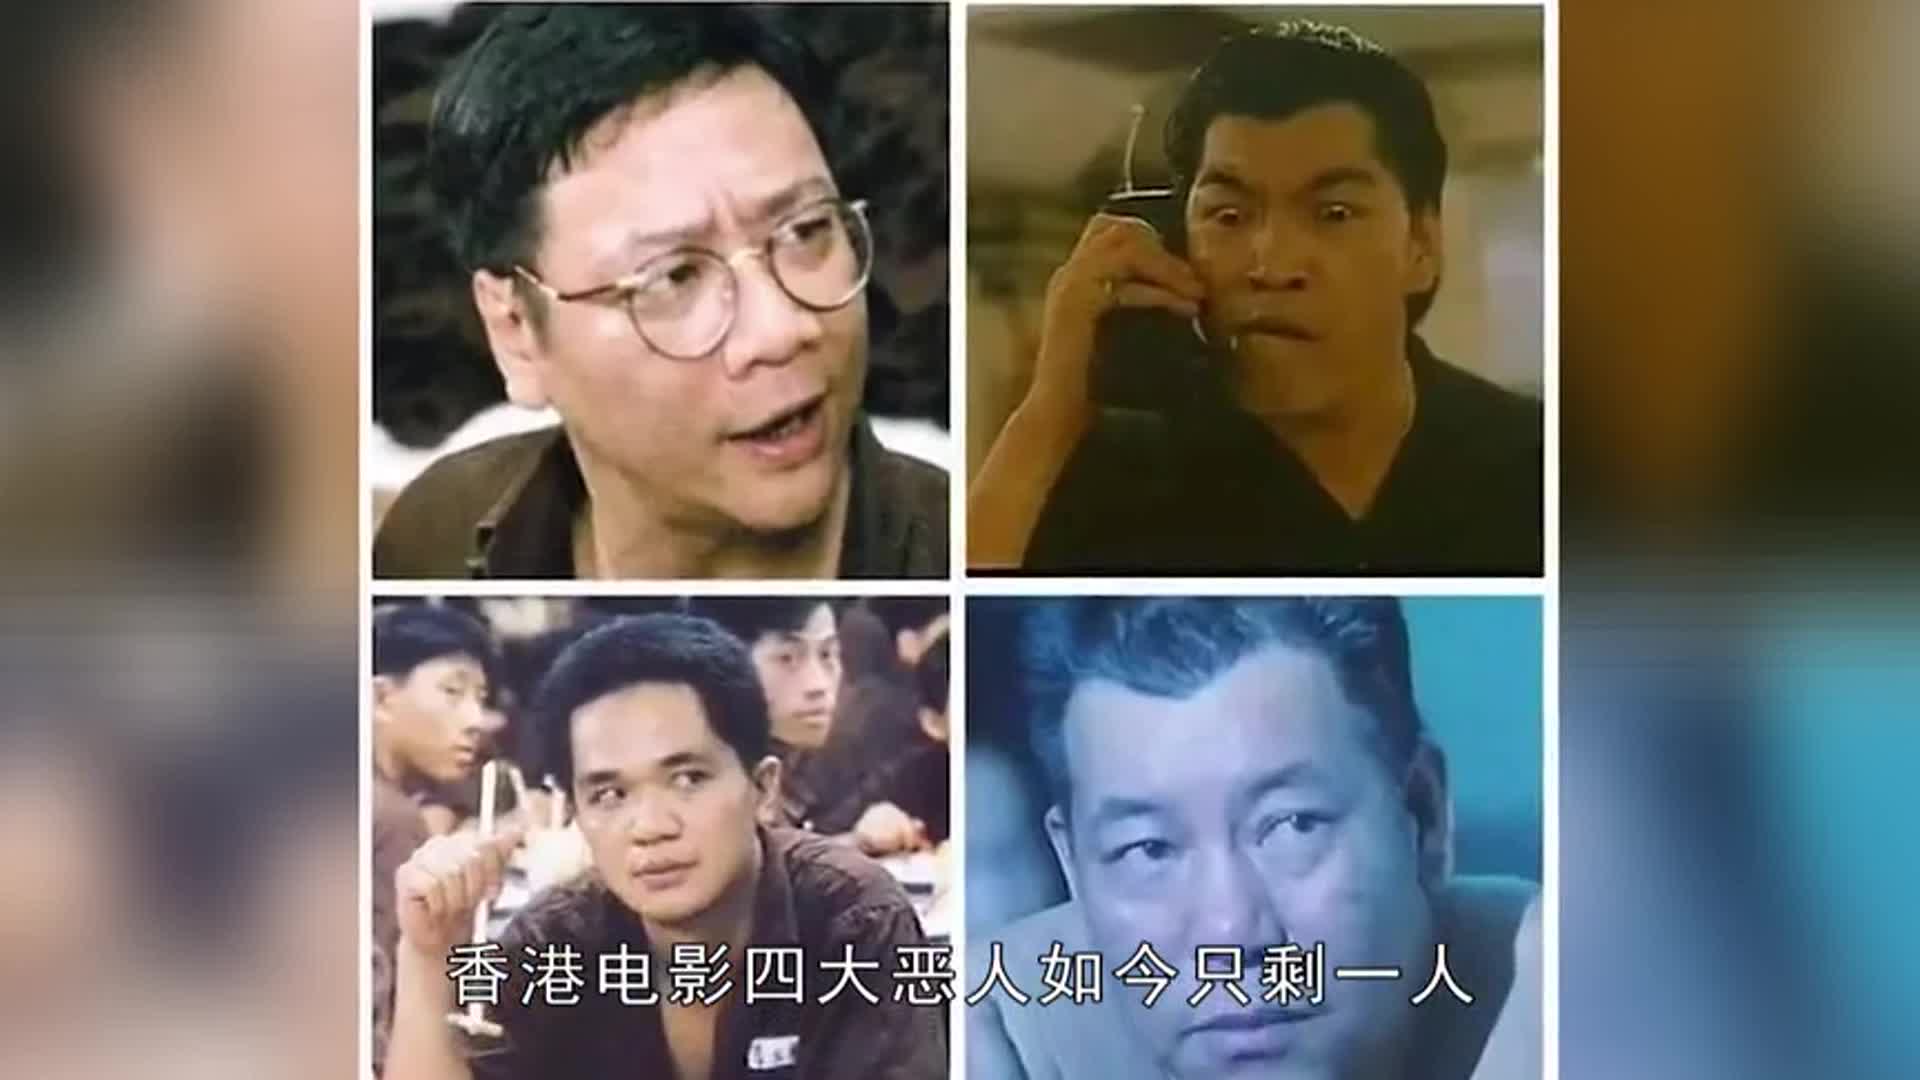 Golden supporting actor of Hong Kong film died and acted as a bad person all his life. Netizen: An era has come to an end!